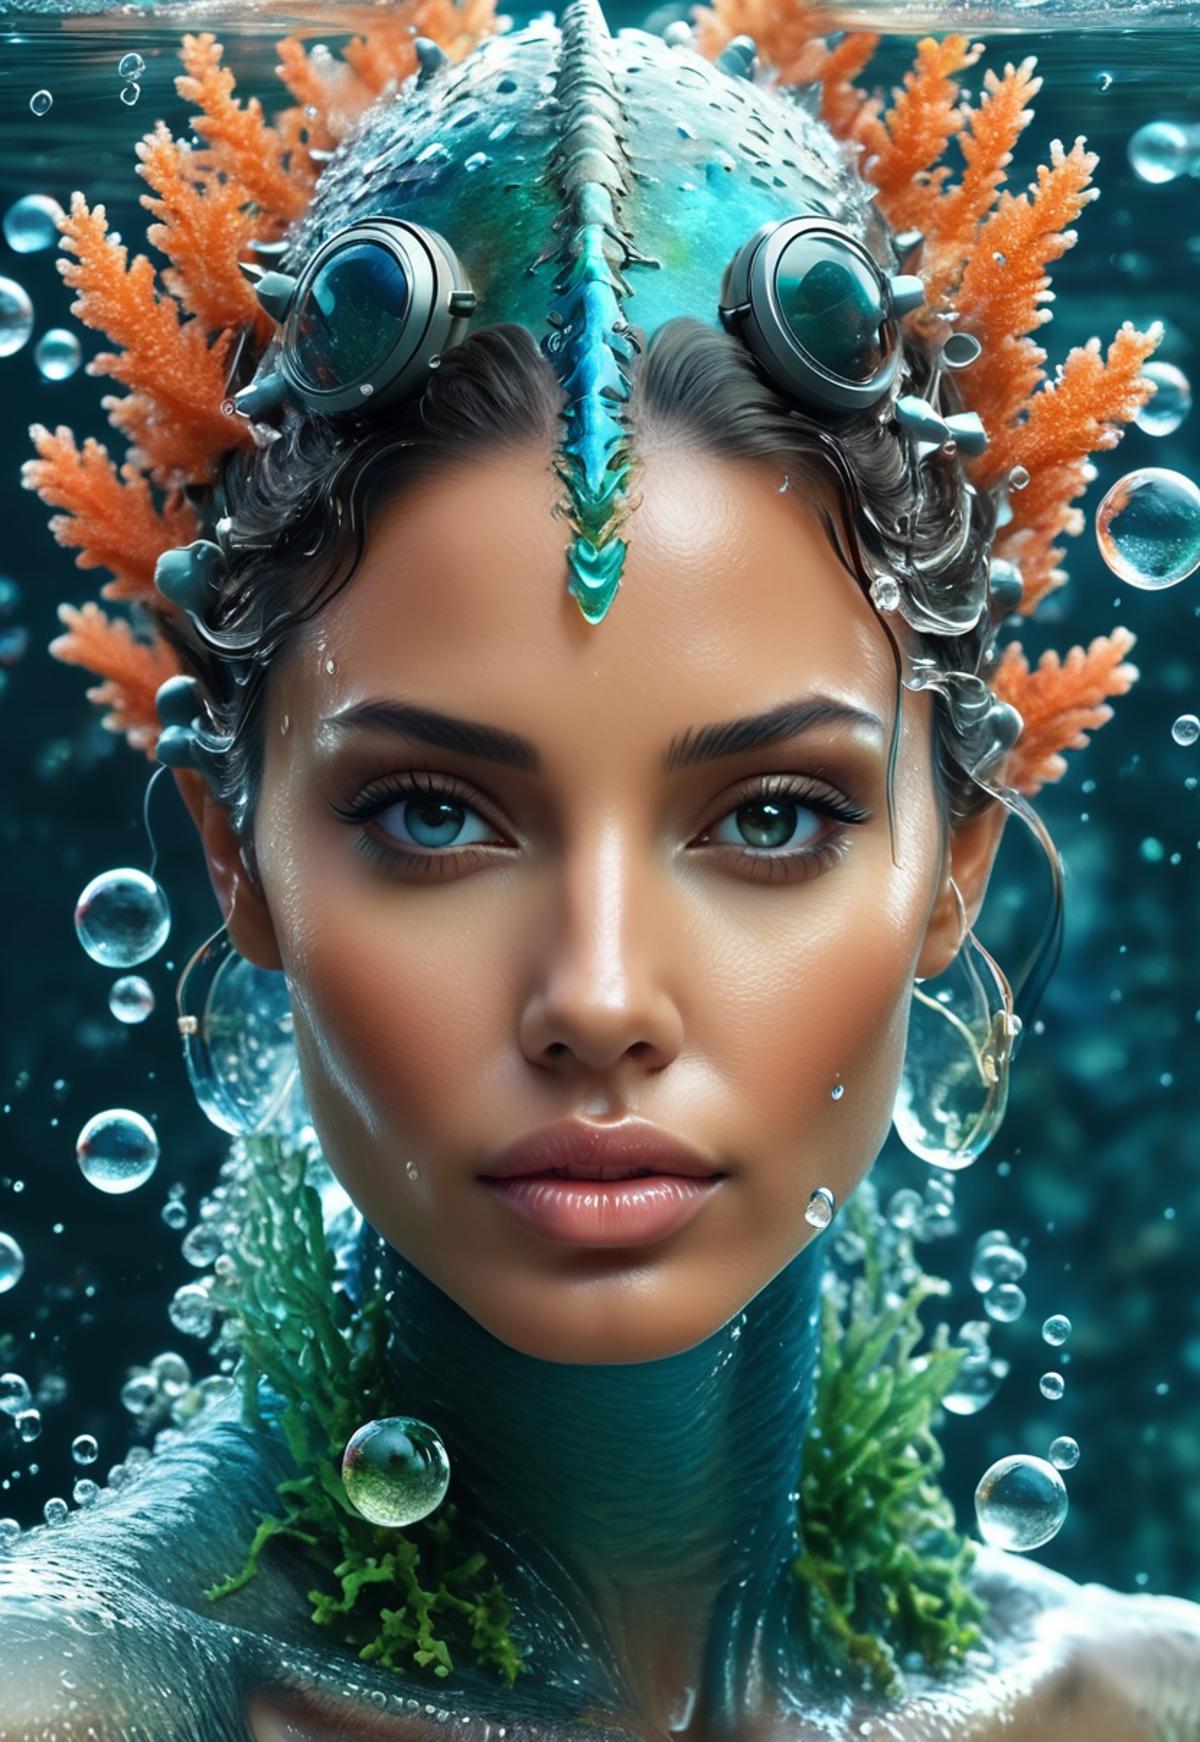 A digital painting of a woman with blue eyes, wearing a crown and jewelry, and surrounded by bubbles.